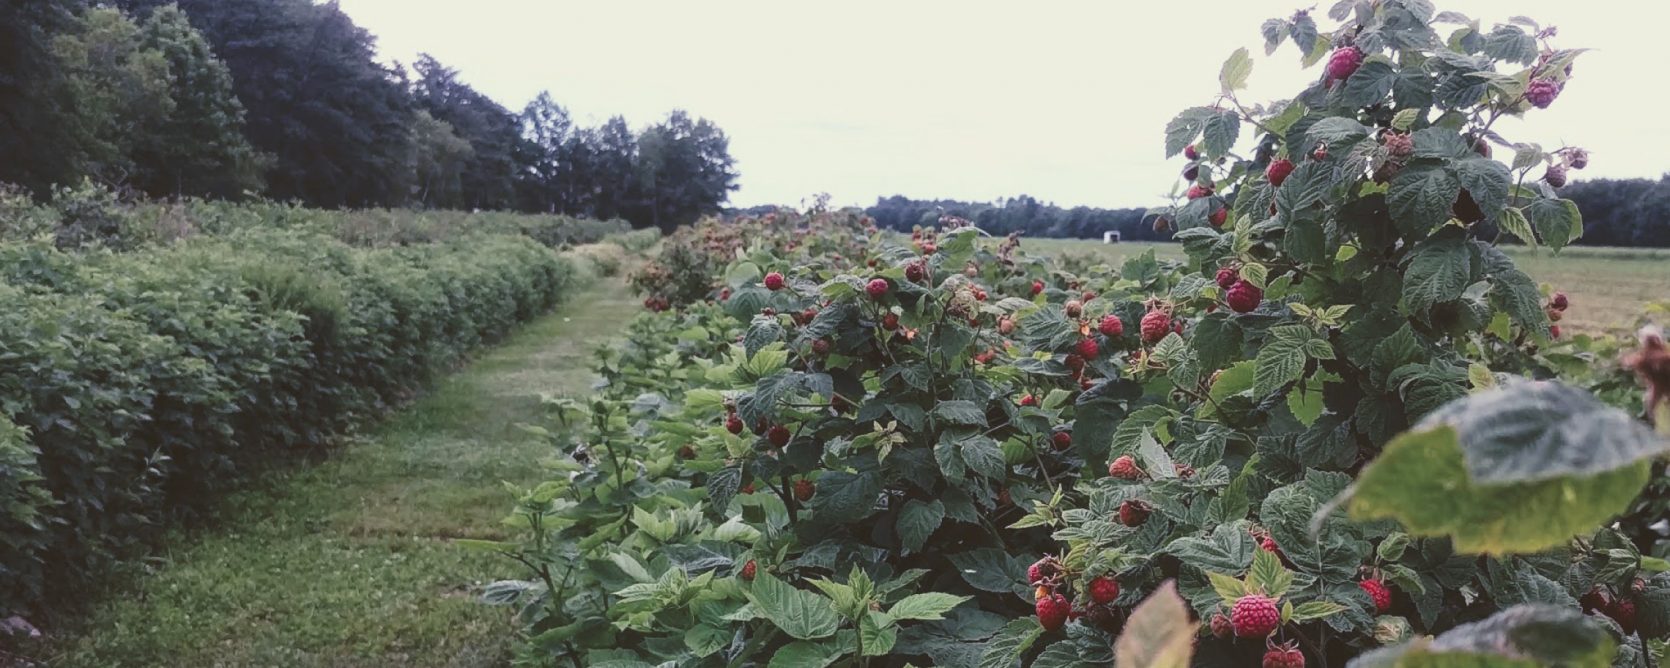 pick your own raspberries at the pineland farms produce division in new gloucester, maine